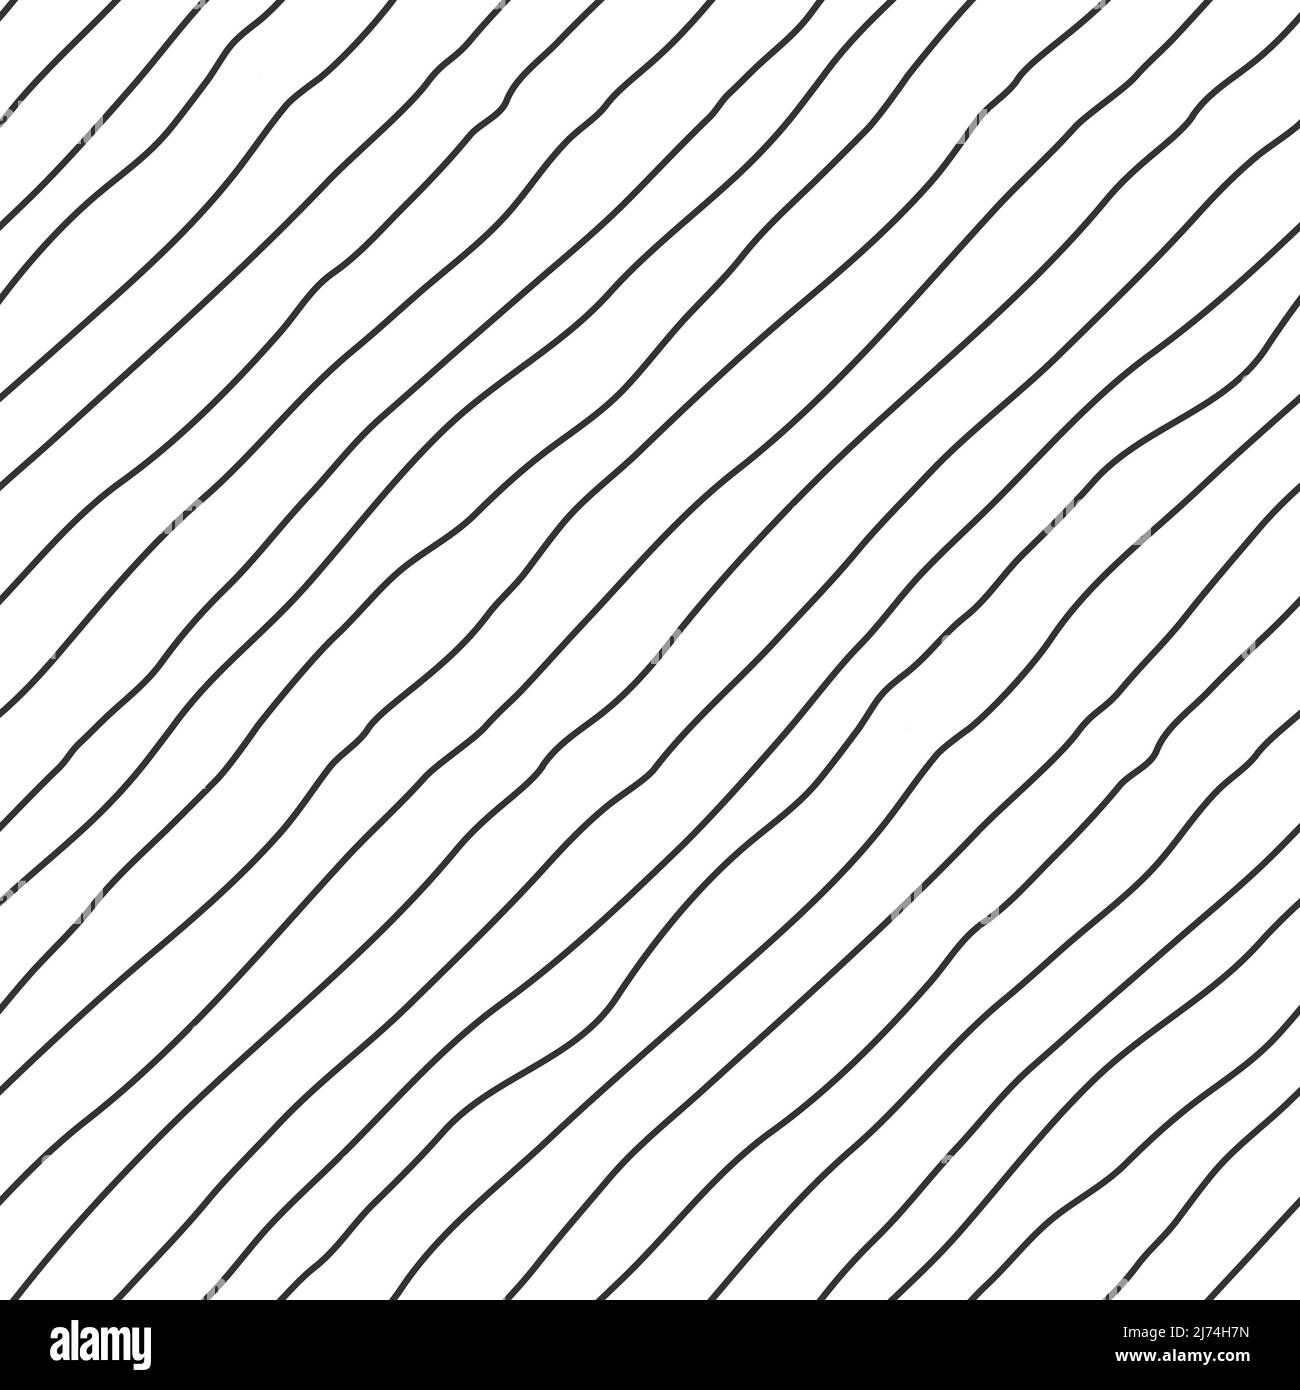 Seamless pattern with a hand-drawn texture. Diagonal uneven free hand lines. Monochrome backdrop with simple hand-drawn lines. Black and white vector Stock Vector